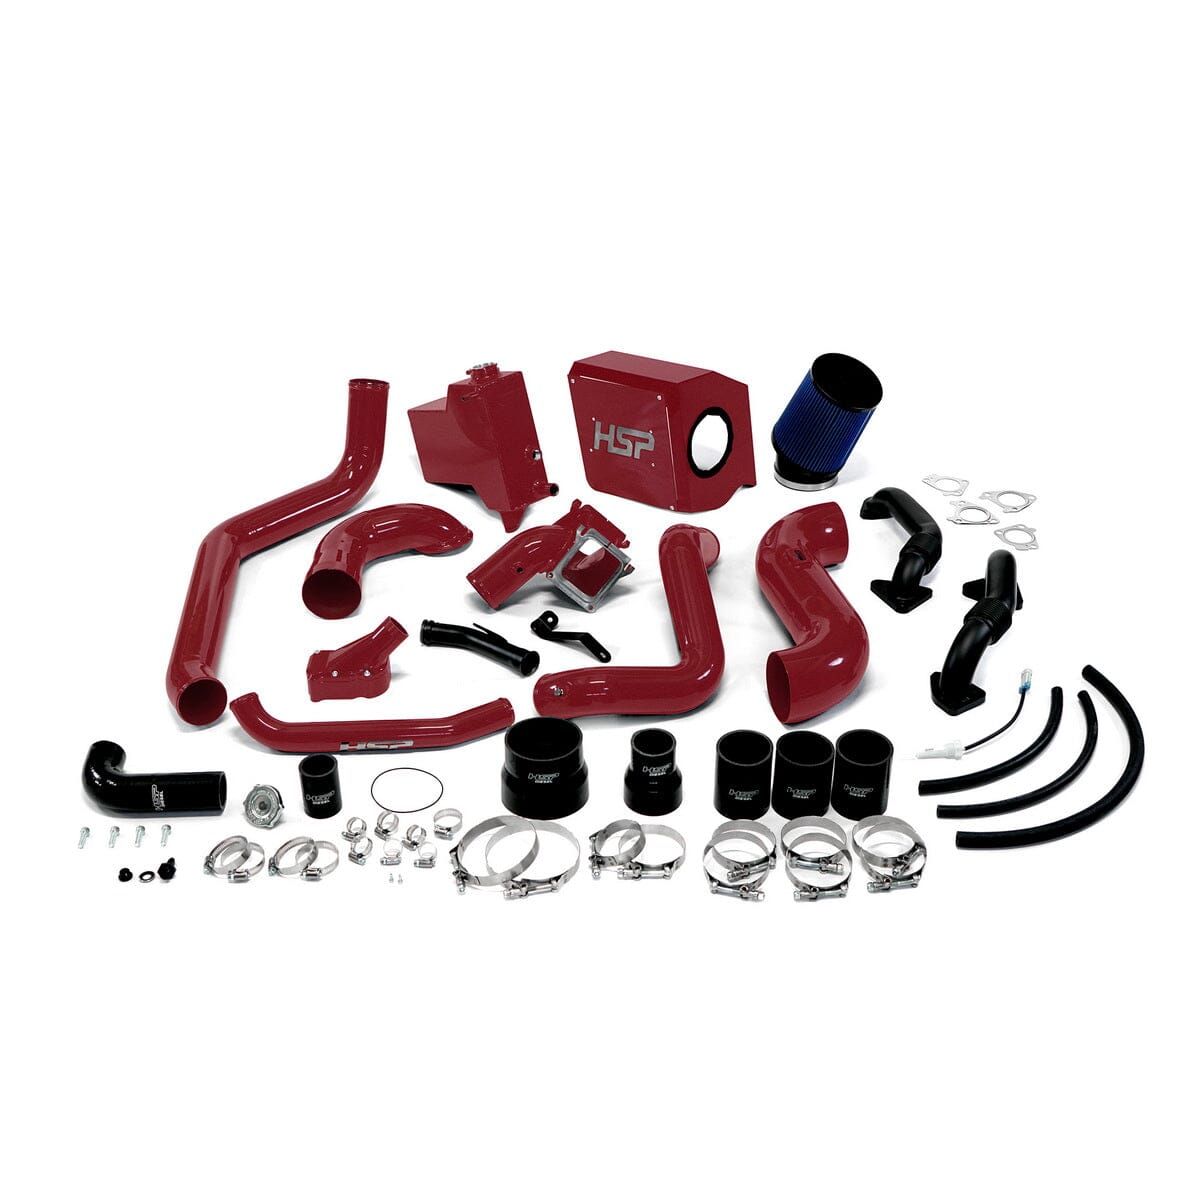 HSP Deluxe Max Air Flow Bundle (2007.5-2010 Chevrolet / GMC) Cold Air Intake HSP Diesel Candy Red 